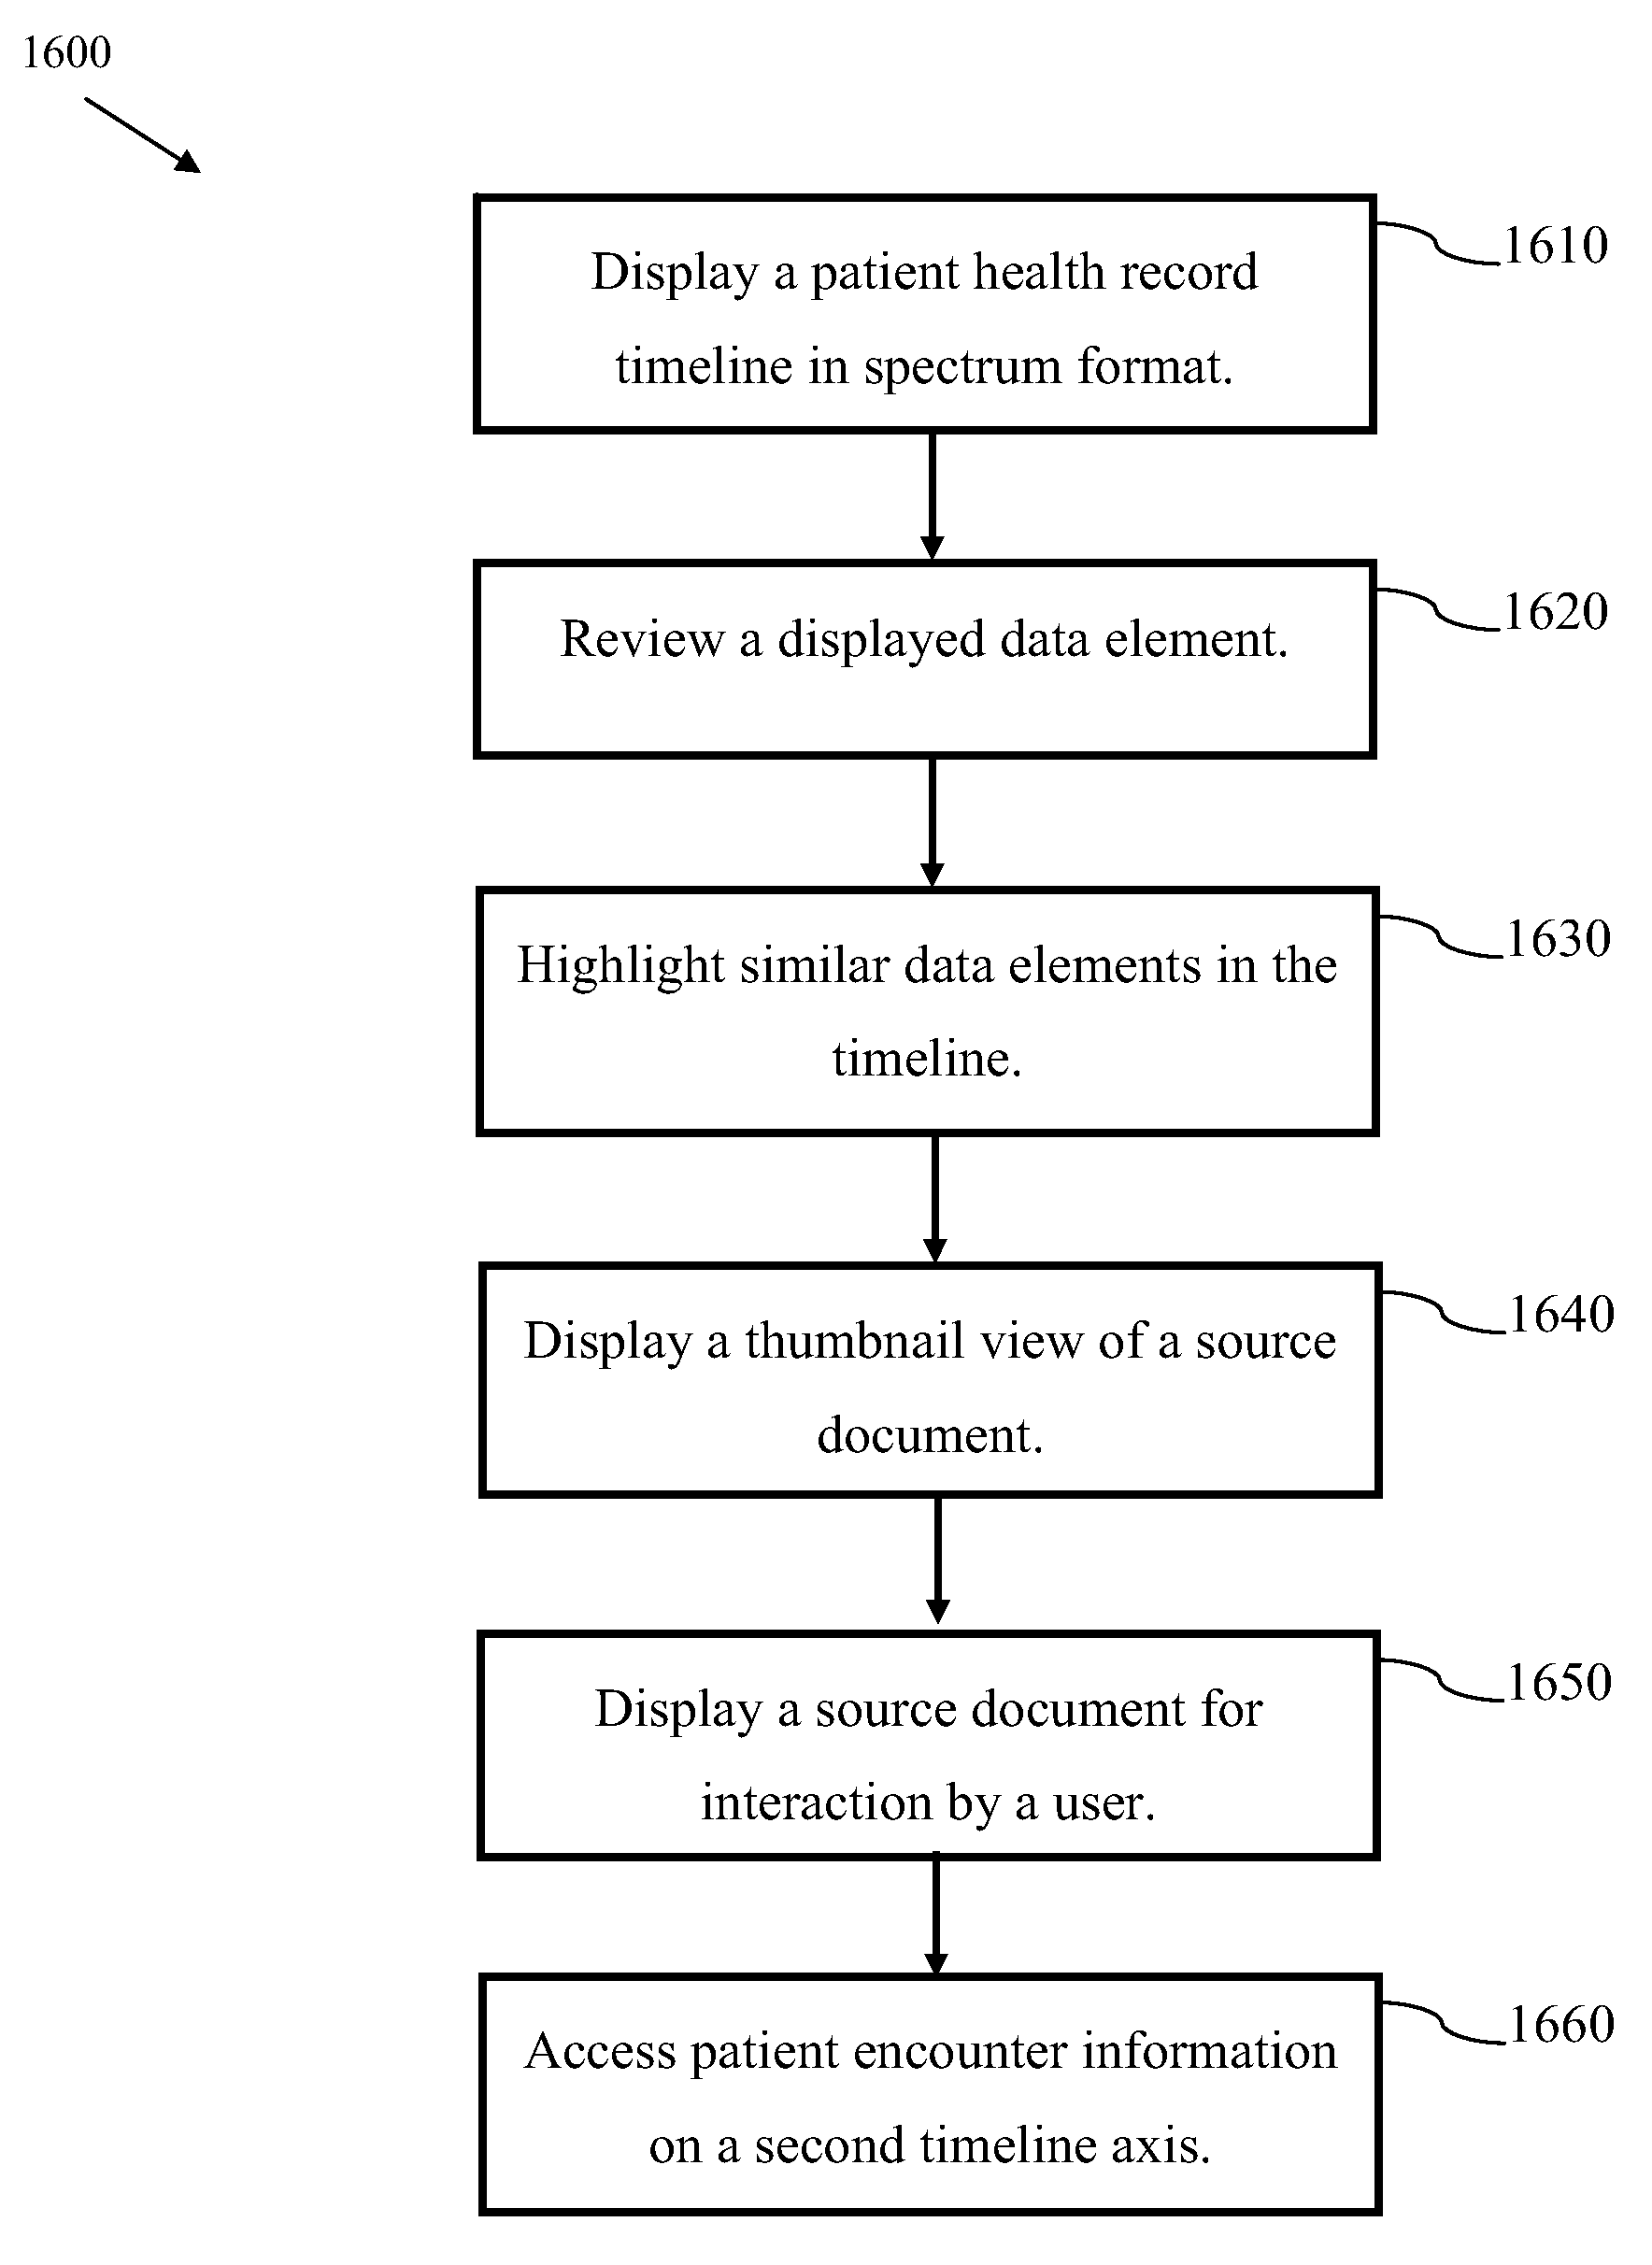 Interactive multi-axis longitudinal health record systems and methods of use